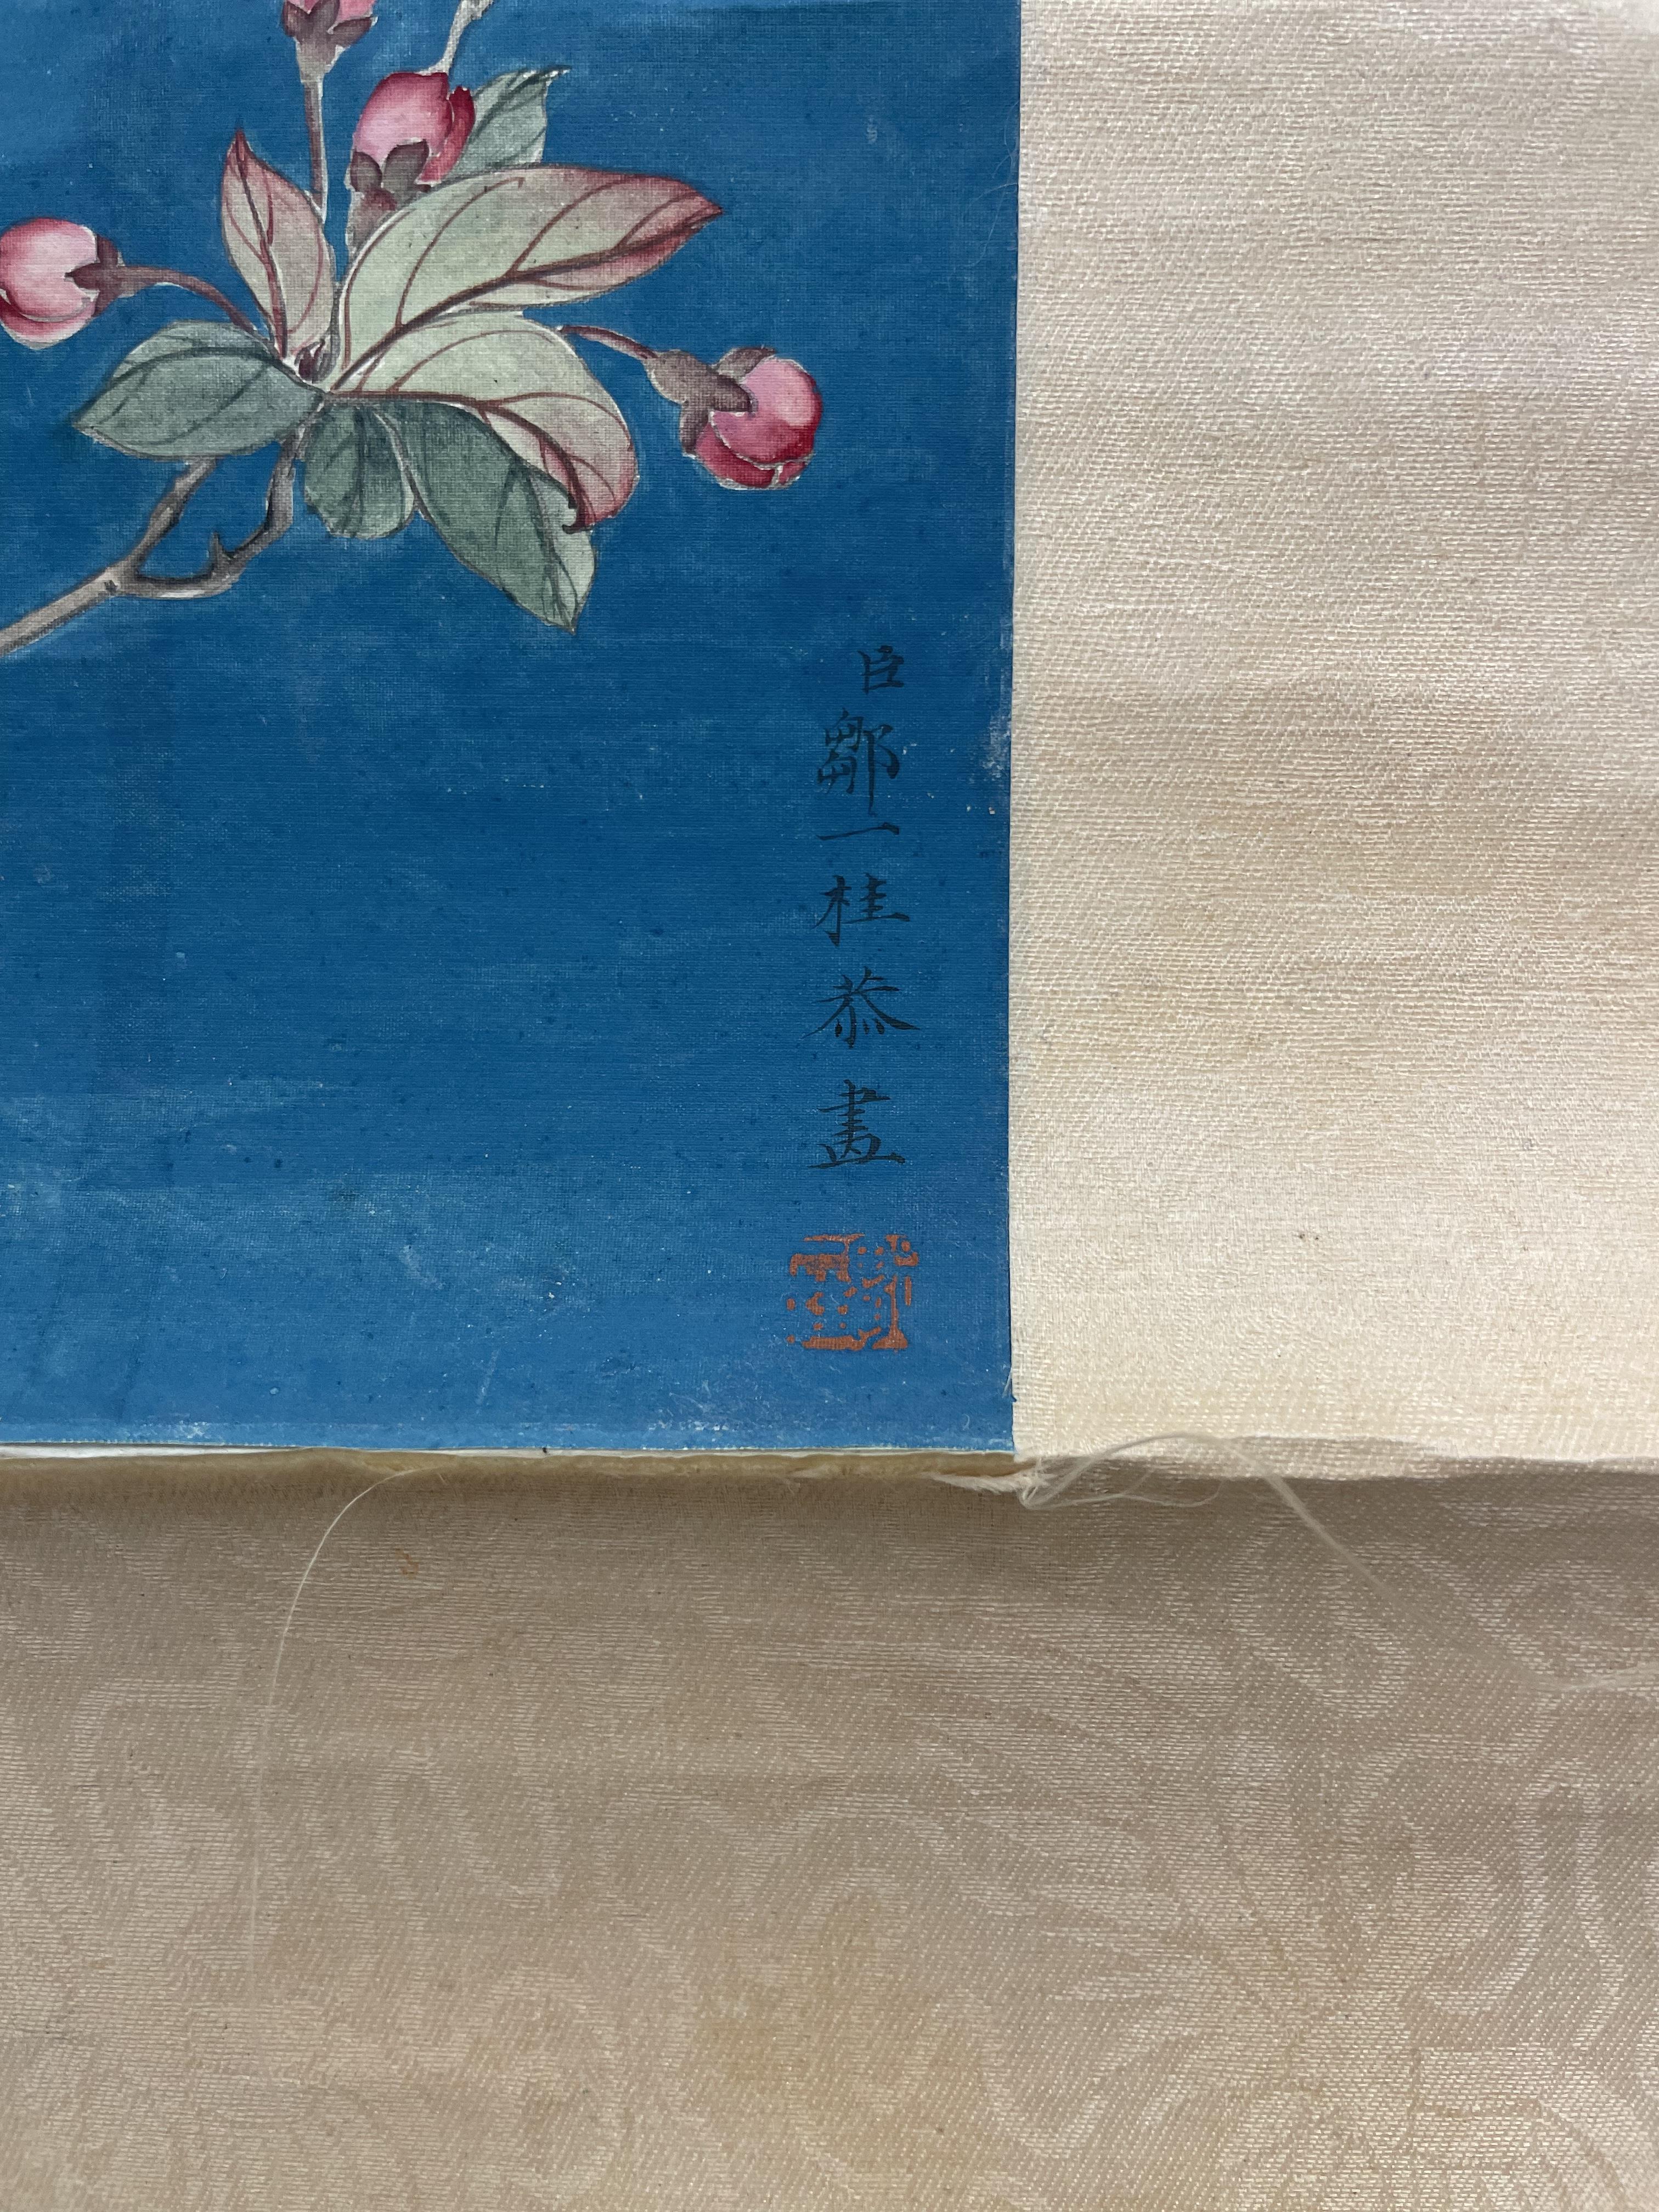 ZOU YIGUI 鄒一桂 (Wuxi, China, 1686 - 1772) Four flower paintings 花卉軸四件 - Image 15 of 17